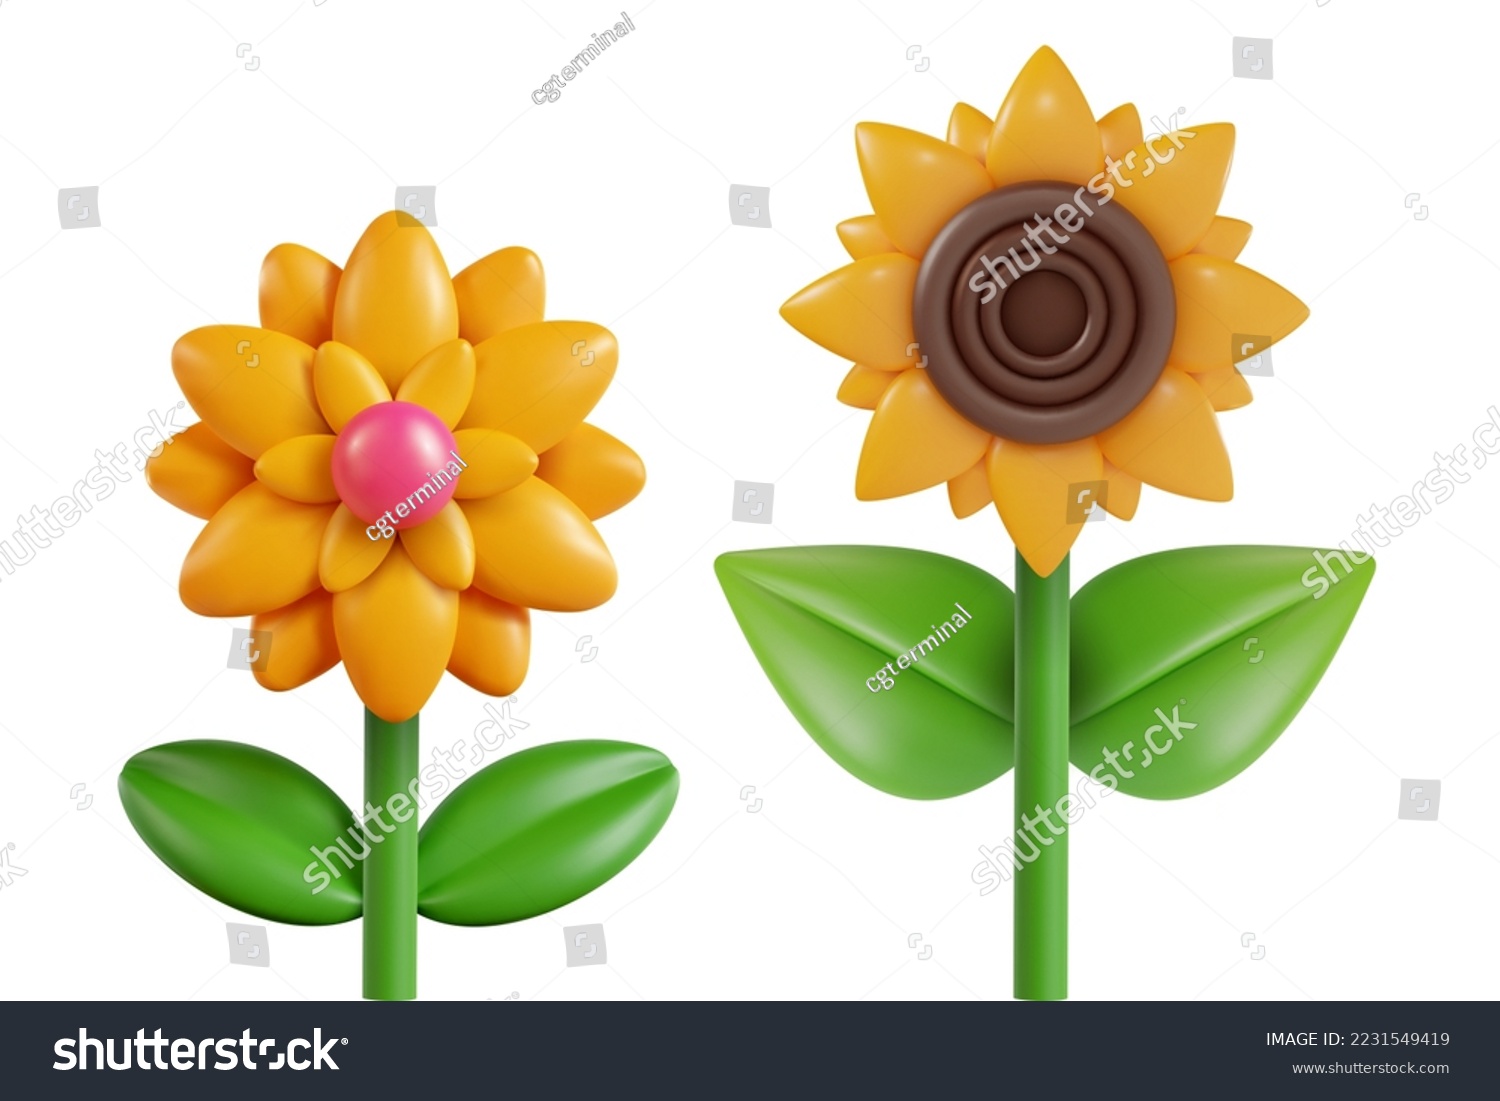 SVG of 3d cartoon sunflower and flower in vector realistic funny style. Cute art element. Modern plasticine or glossy clay design object. Sweet colorful illustration on minimal background. svg